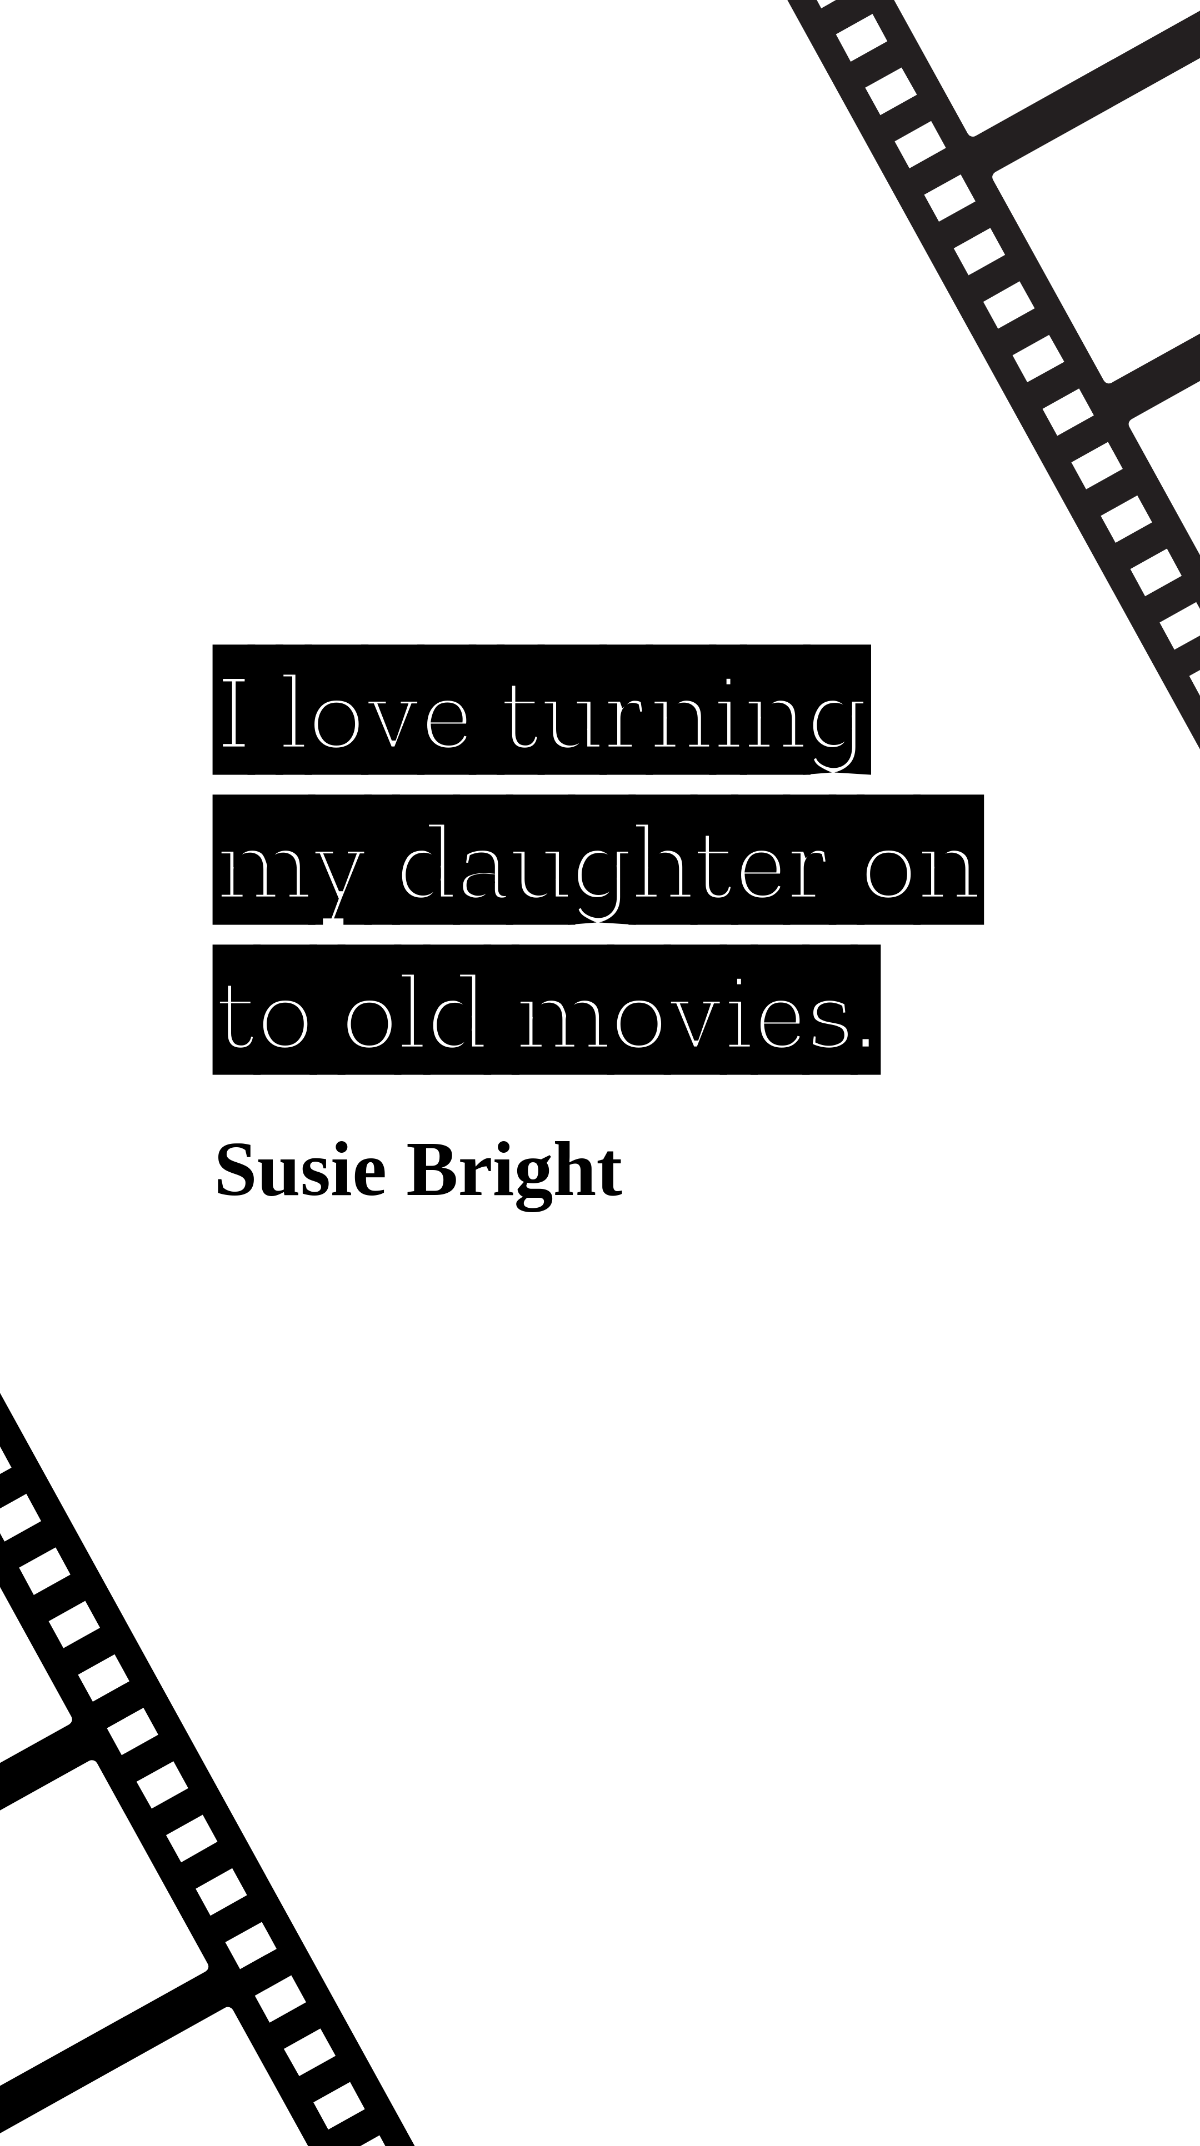 Free Susie Bright - I love turning my daughter on to old movies. Template